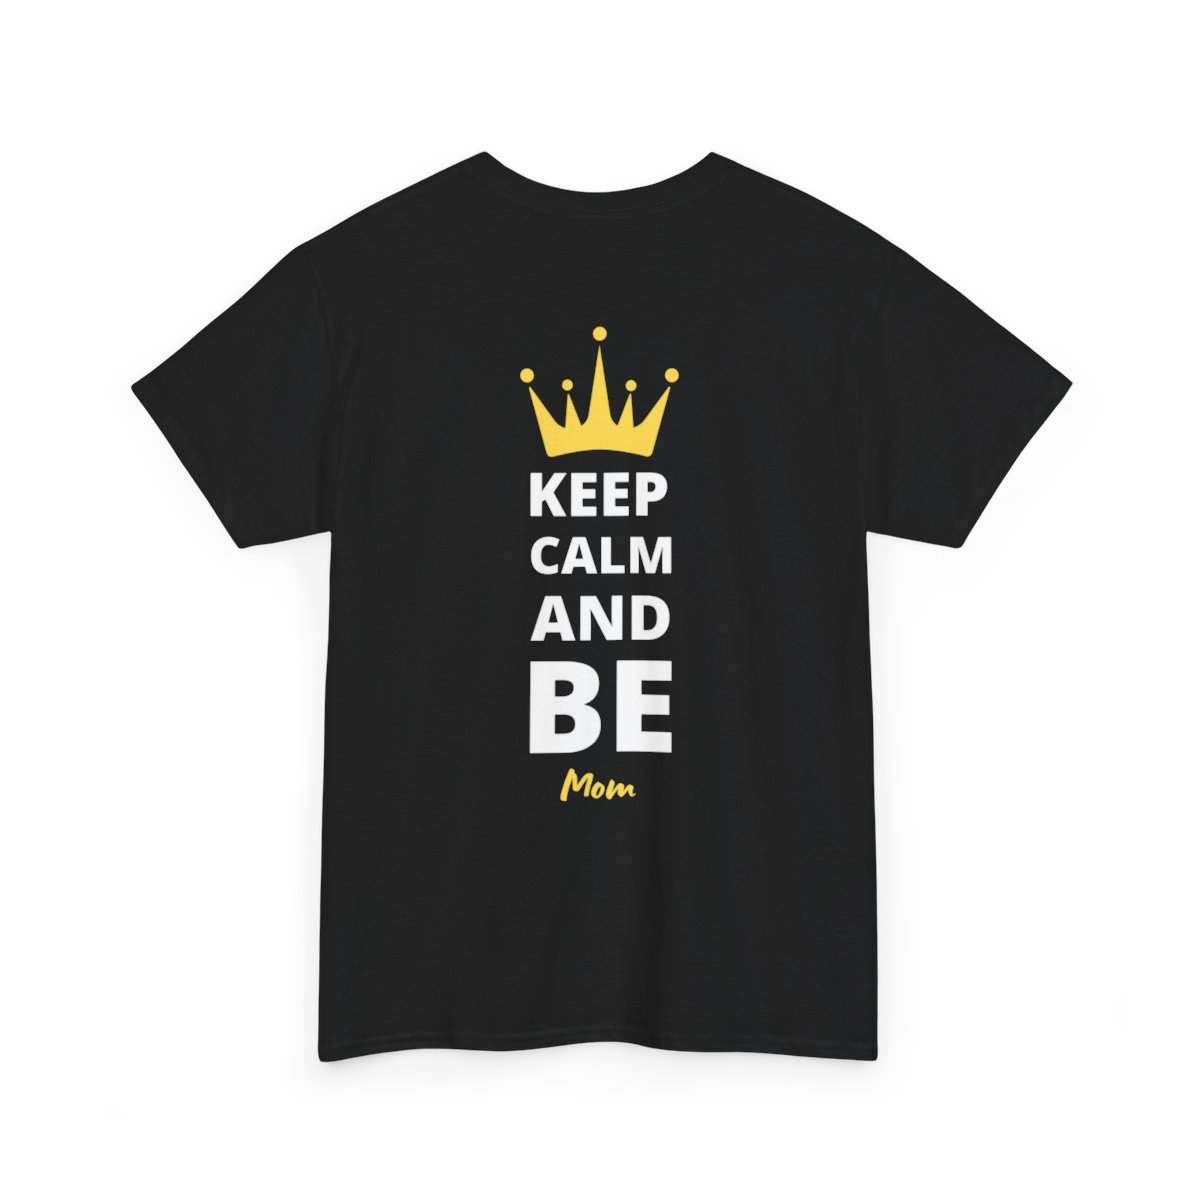 Keep calm and be mom – on the back – t-shirt